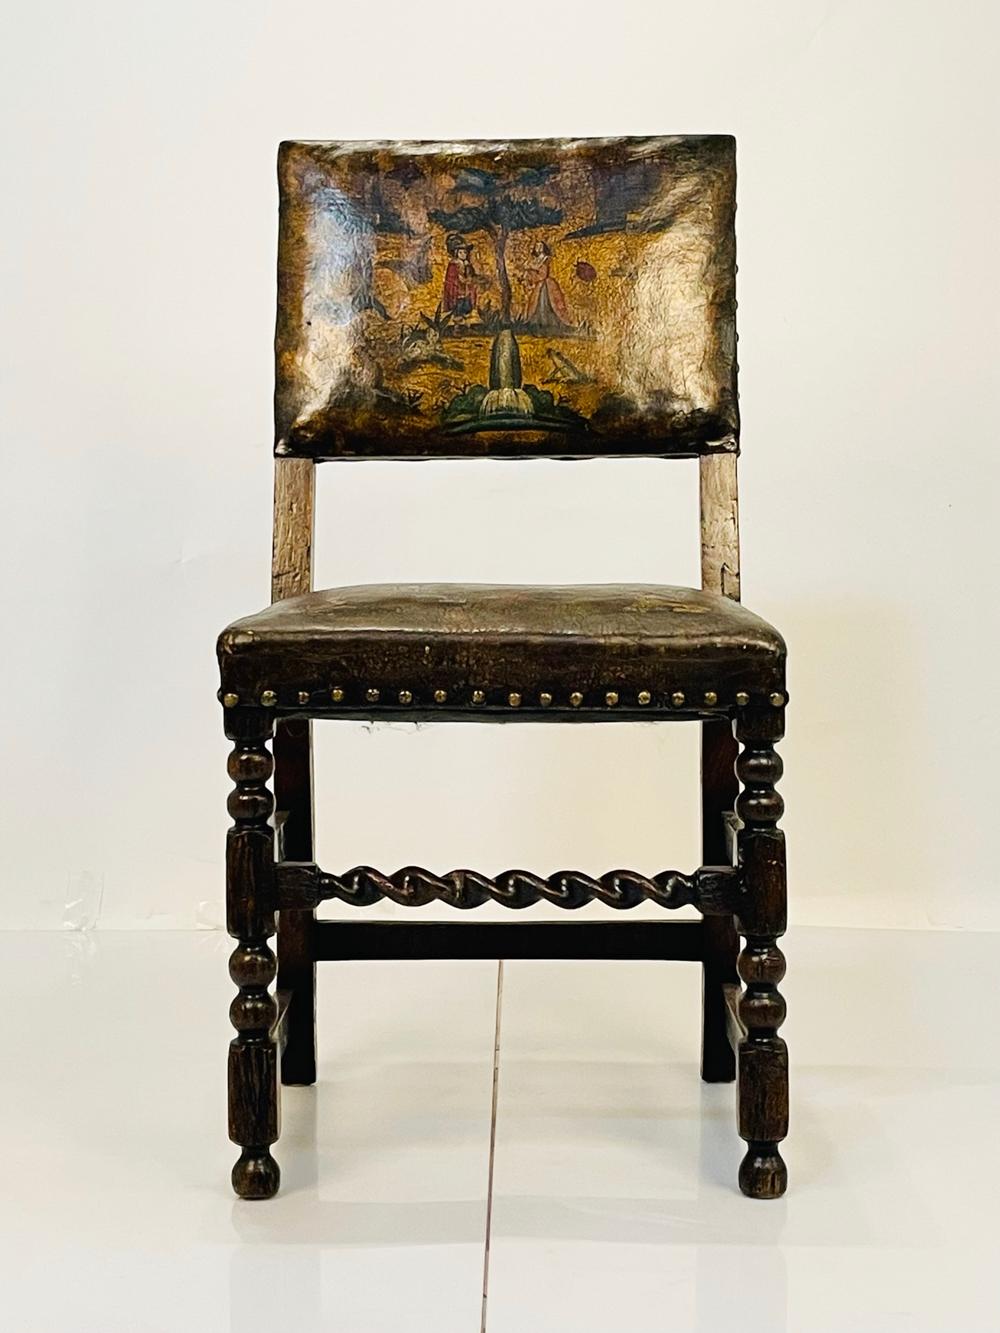 Introducing our exquisite Antique Leather & Wood Chair with a captivating painting on the seat and backrest, meticulously crafted in the heart of France. This remarkable piece of furniture seamlessly combines timeless elegance with artistic flair,